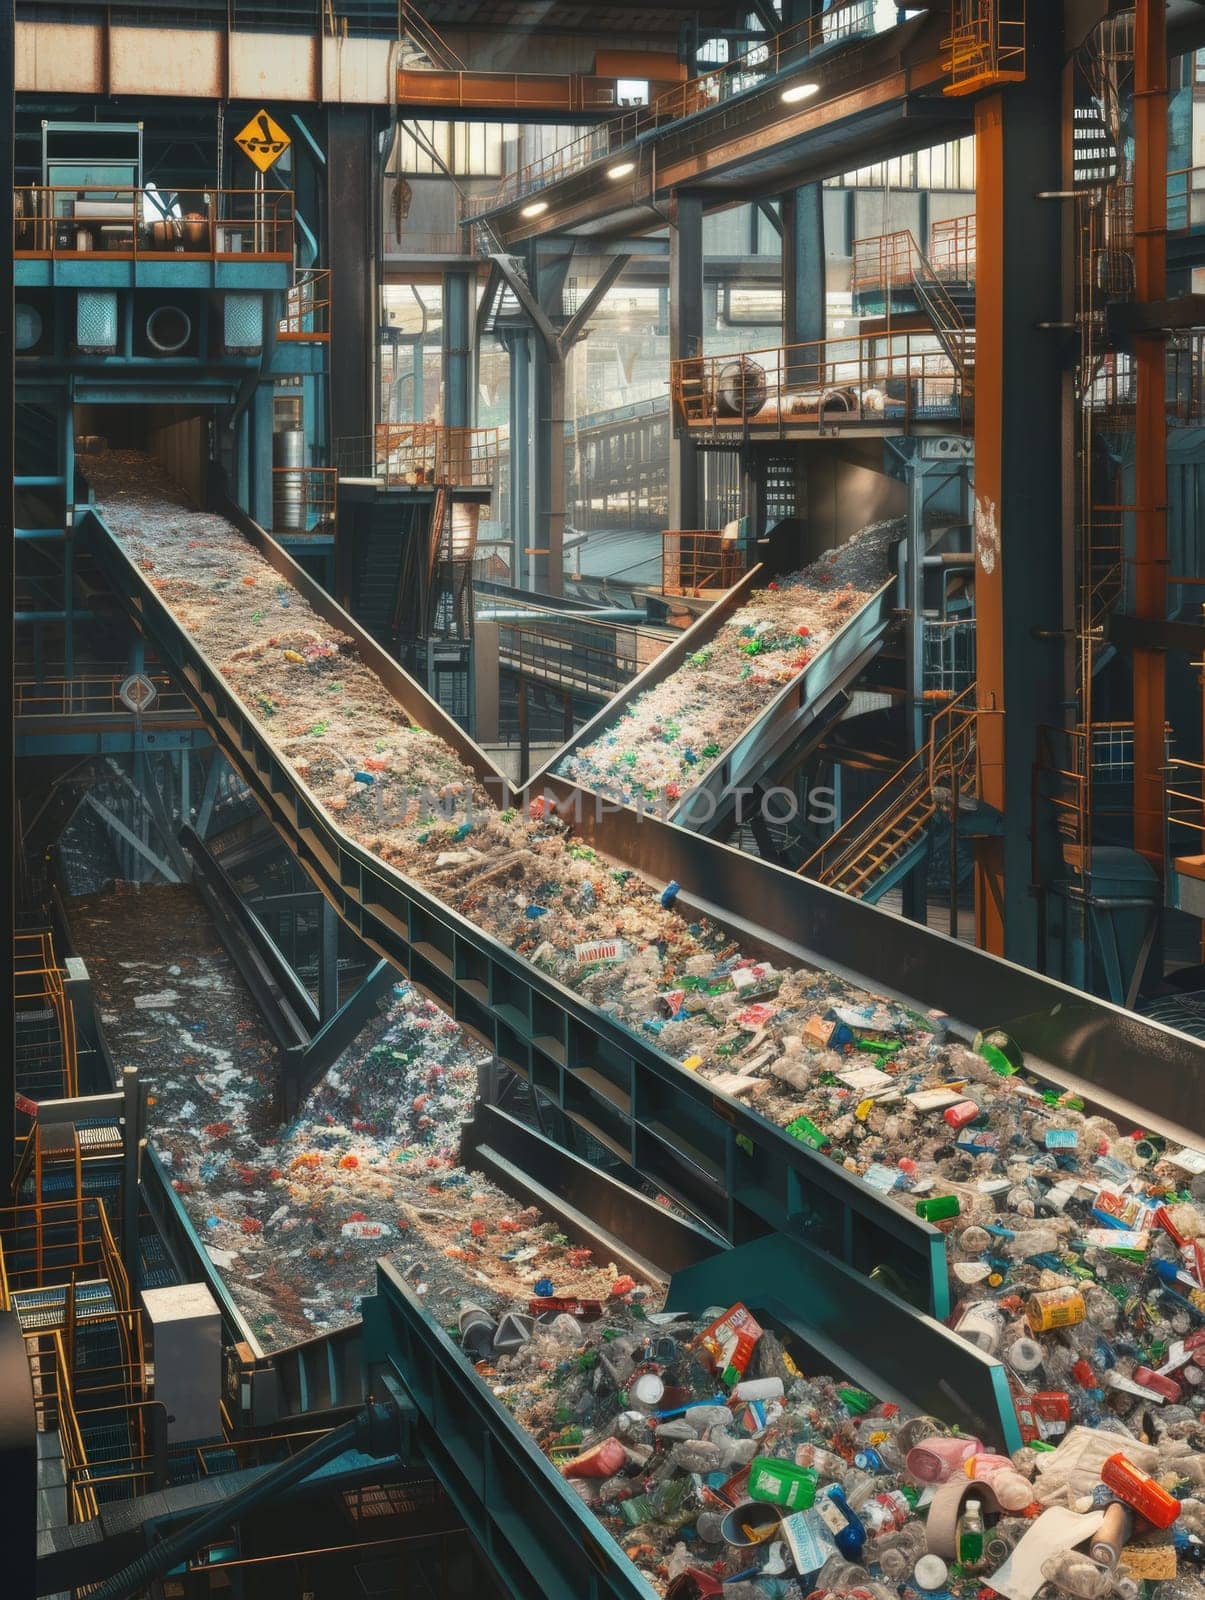 Overlooking the complex system of conveyor belts in a recycling facility sorting mountains of waste. by sfinks